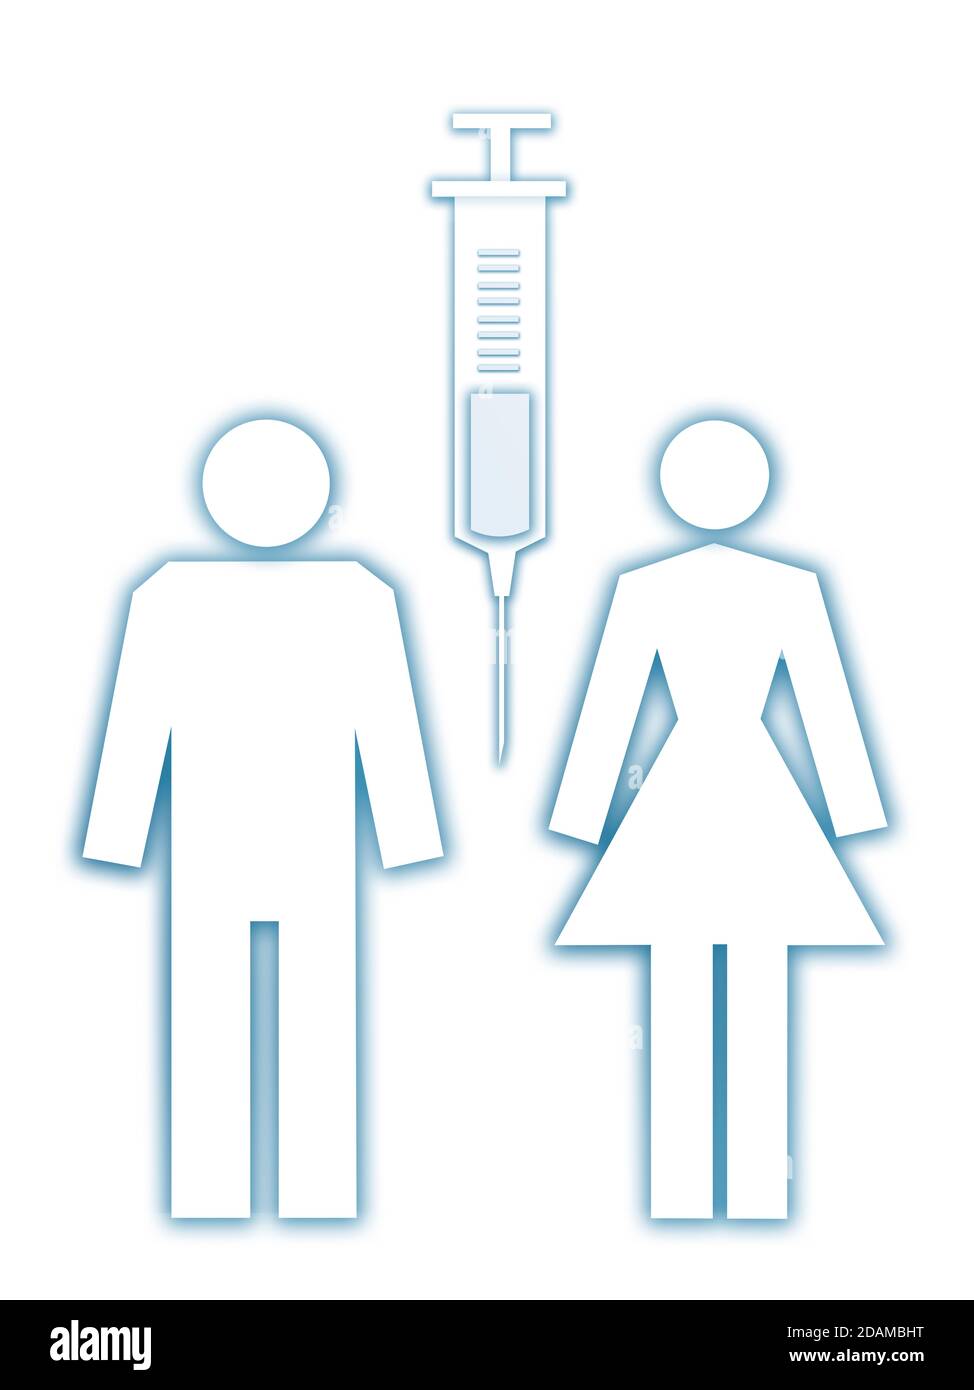 Man and woman with syringe, illustration. Stock Photo